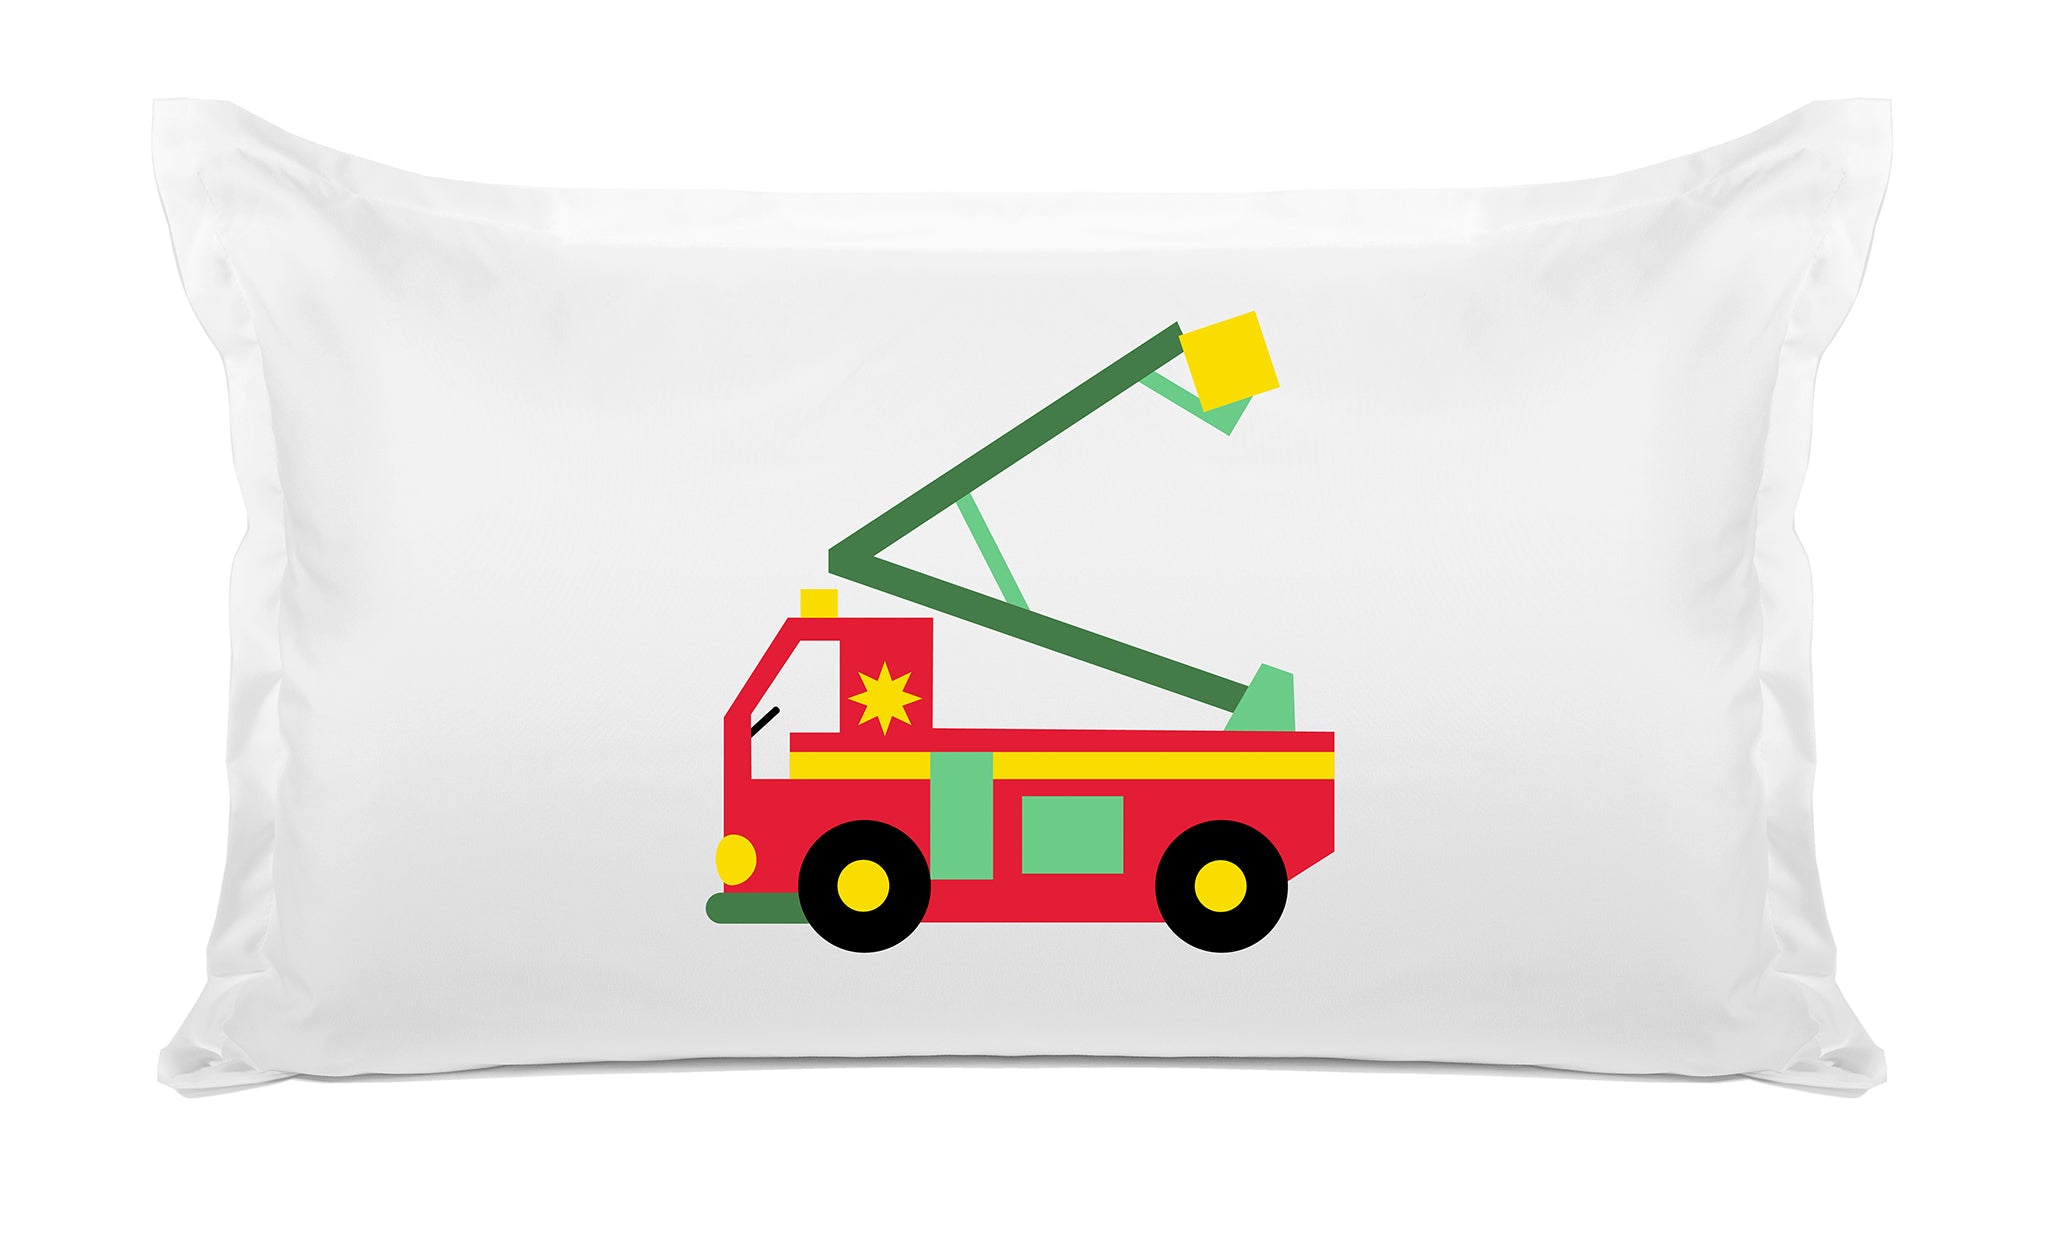 Fire Truck - Personalized Kids Pillowcase Collection